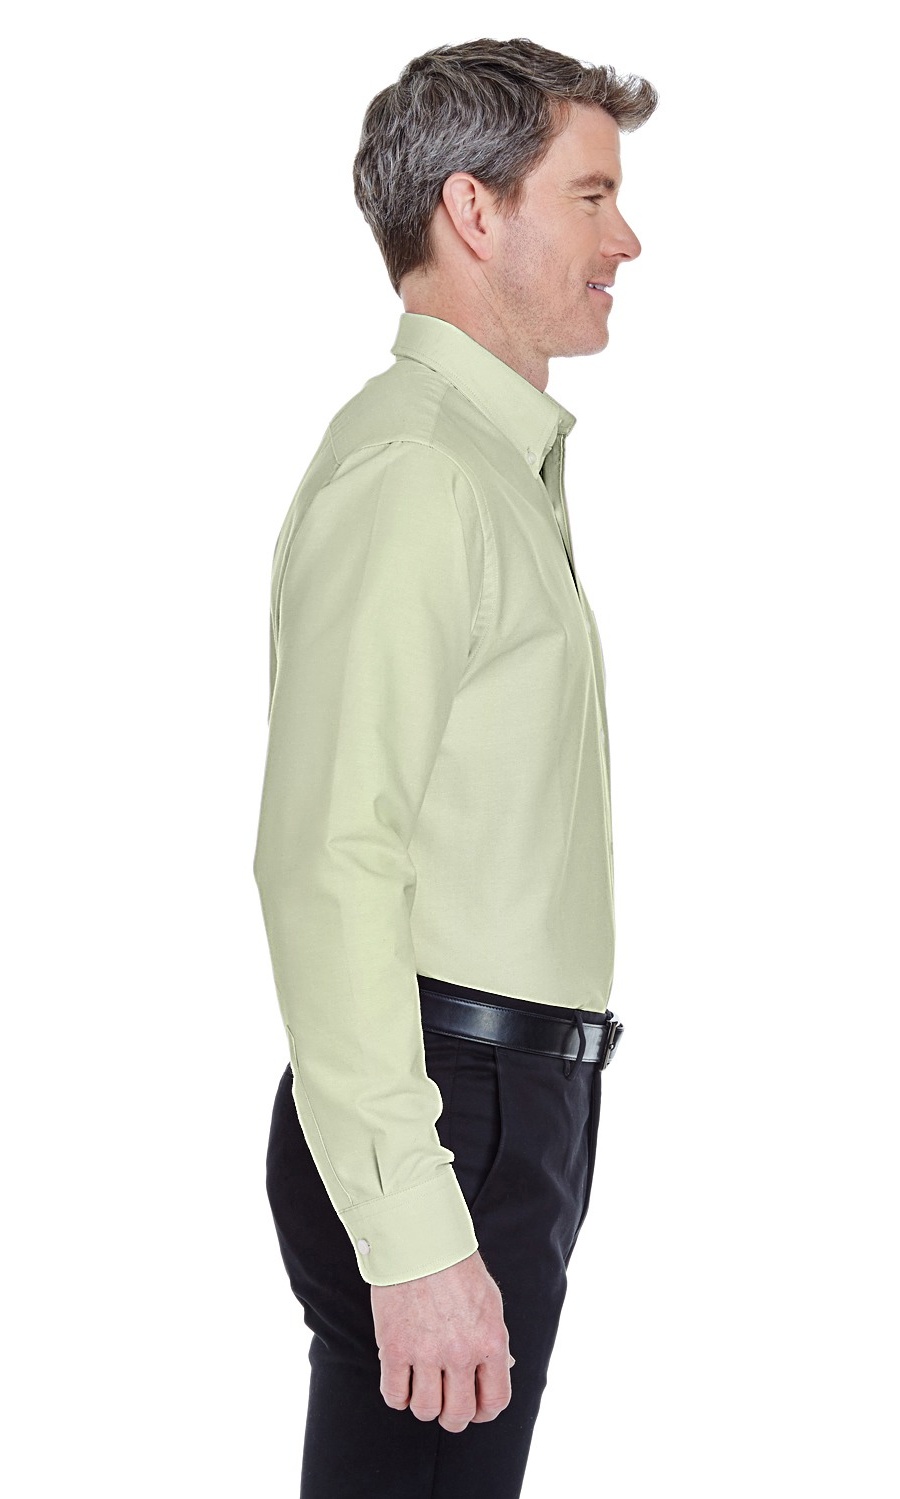 UltraClub 8970 Men's Classic Wrinkle-Resistant Long-Sleeve Oxford - image 3 of 3